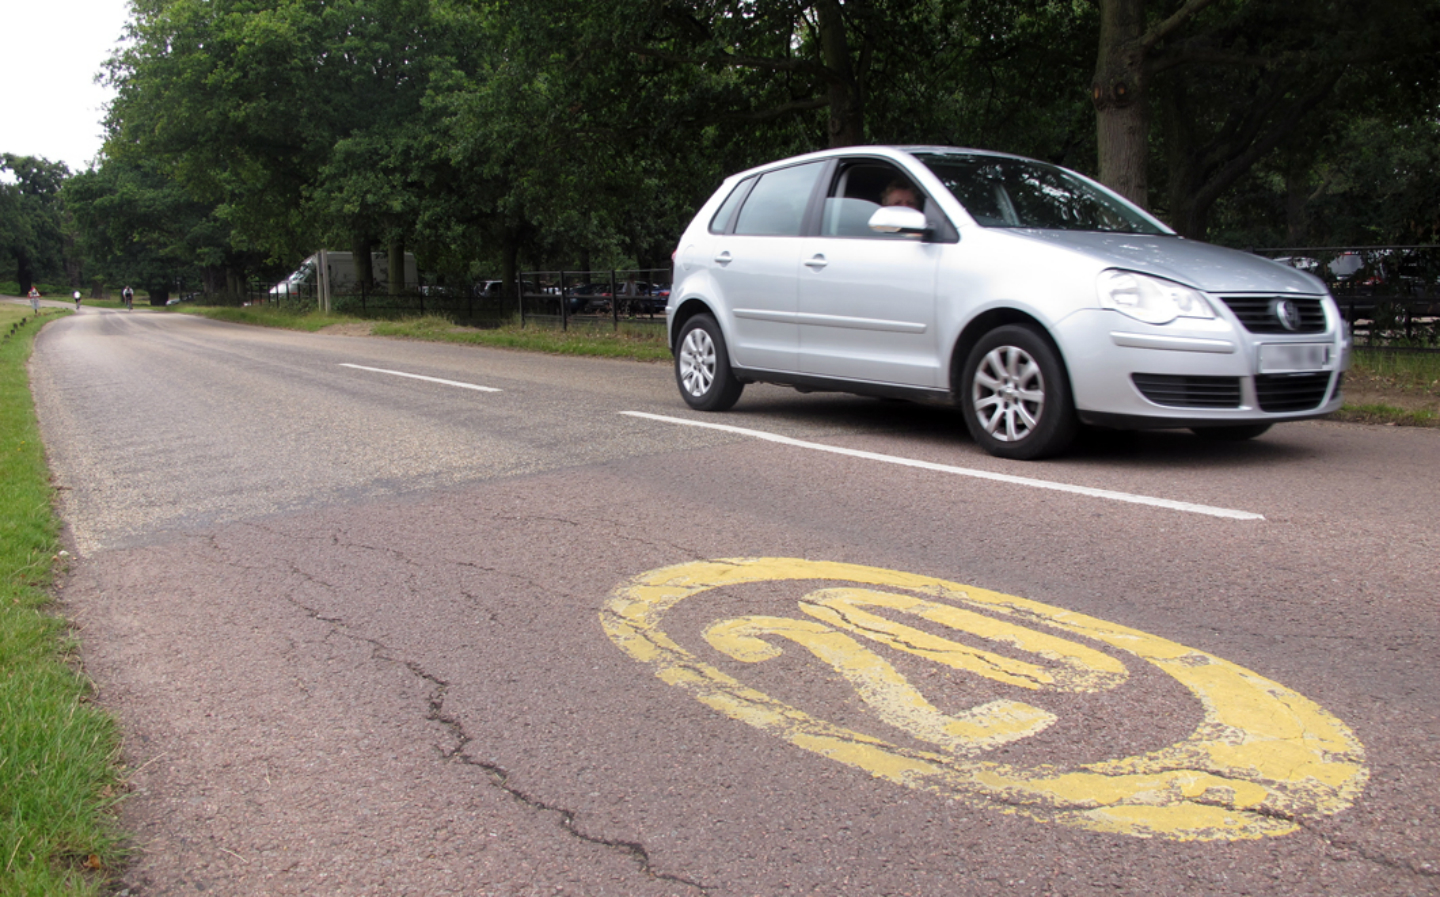 More than four-fifths of drivers can't stick to a 20mph speed limit